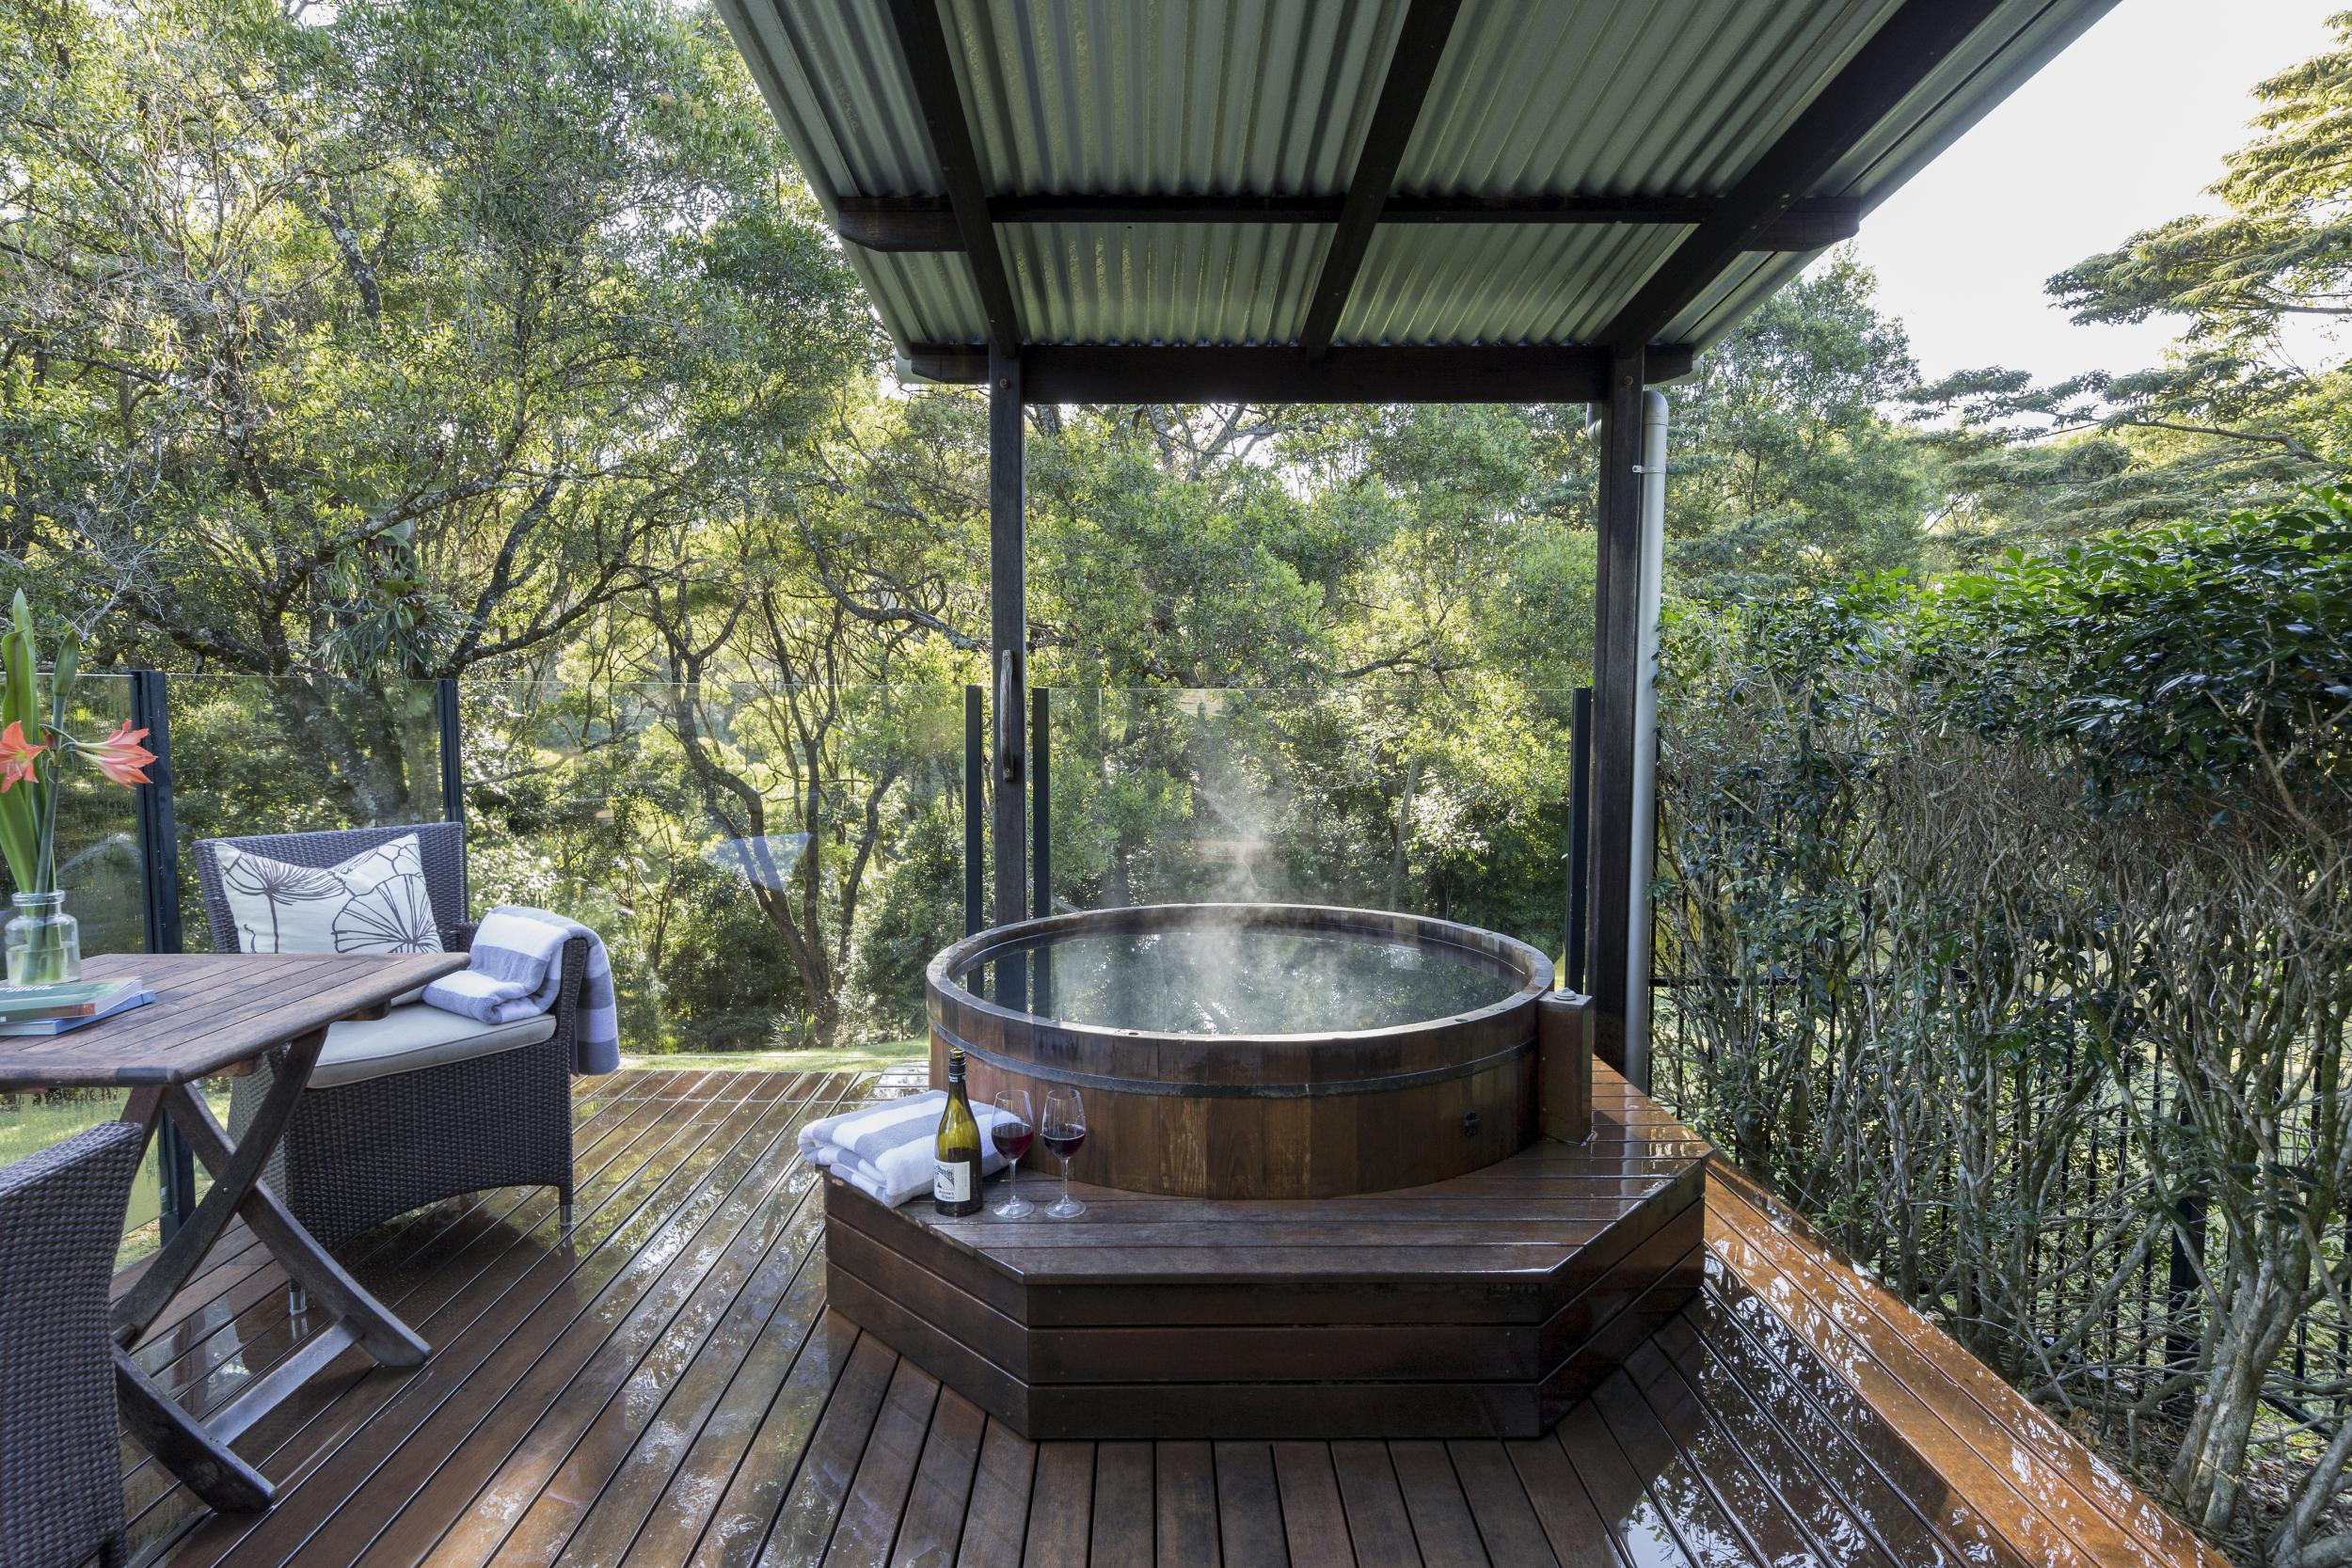 Head to Spicers Tamarind Retreat for some hardcore relaxation